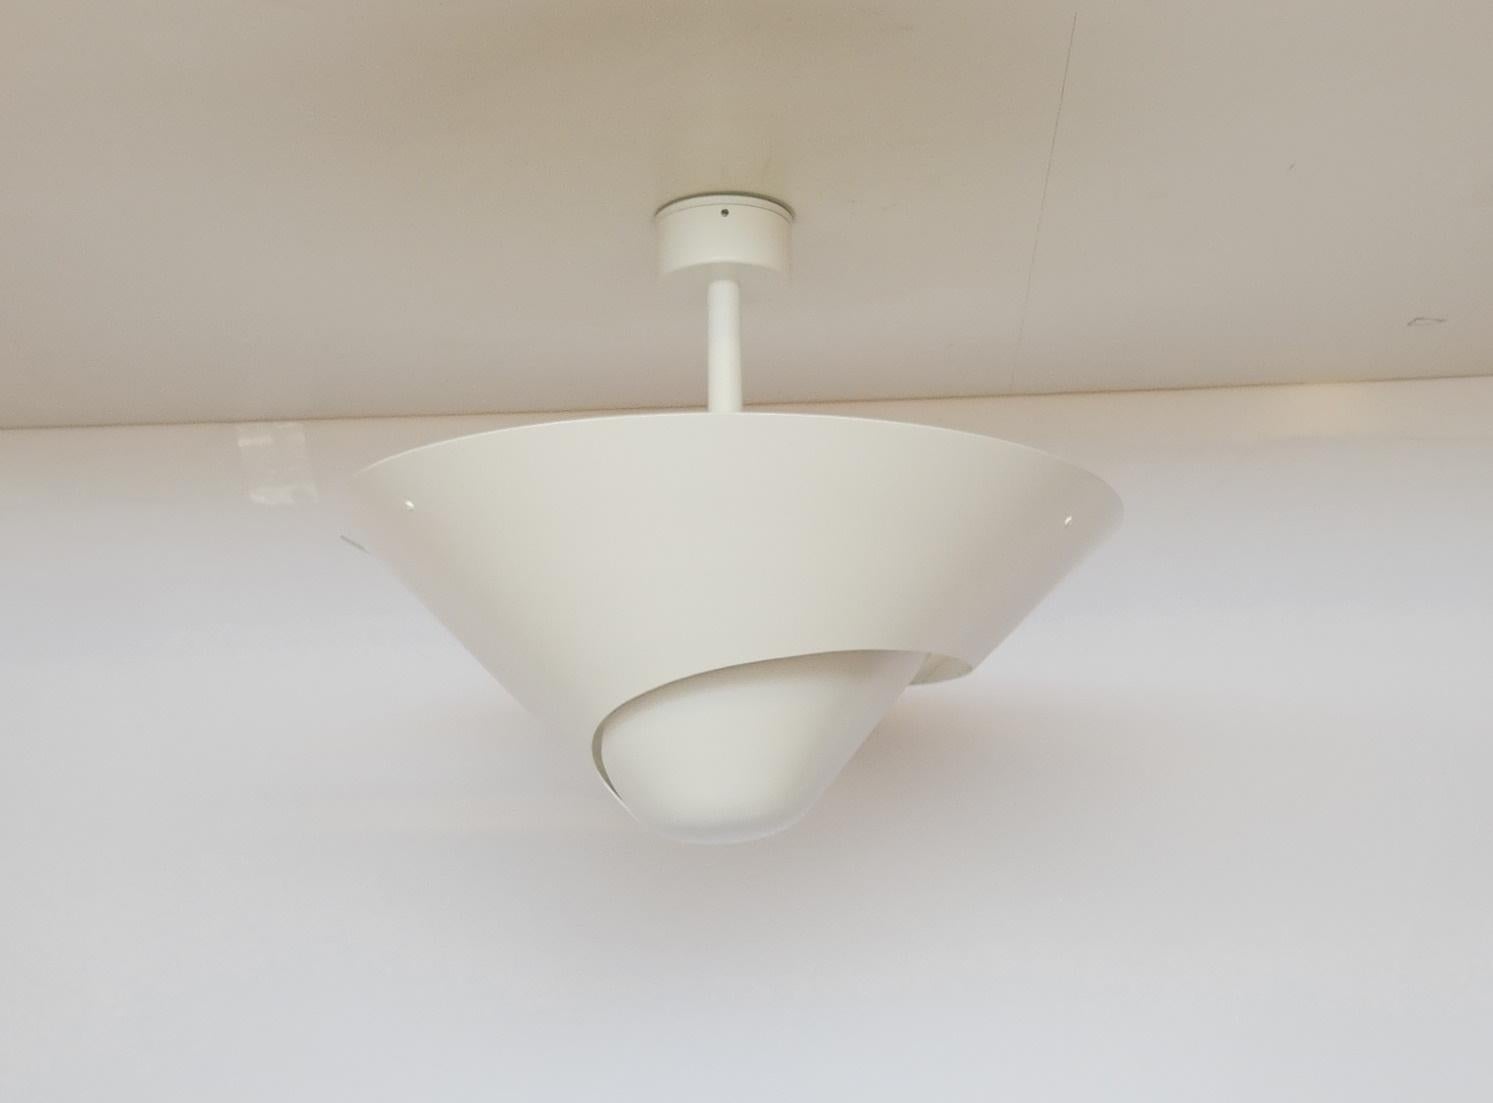 A snail shell provides the inspiration for this lamp with its swirling cut out in the circular shade. Light projects downward through the opening while the shade causes light to reflect from the ceiling.

Custom drop lengths upon approval. Available